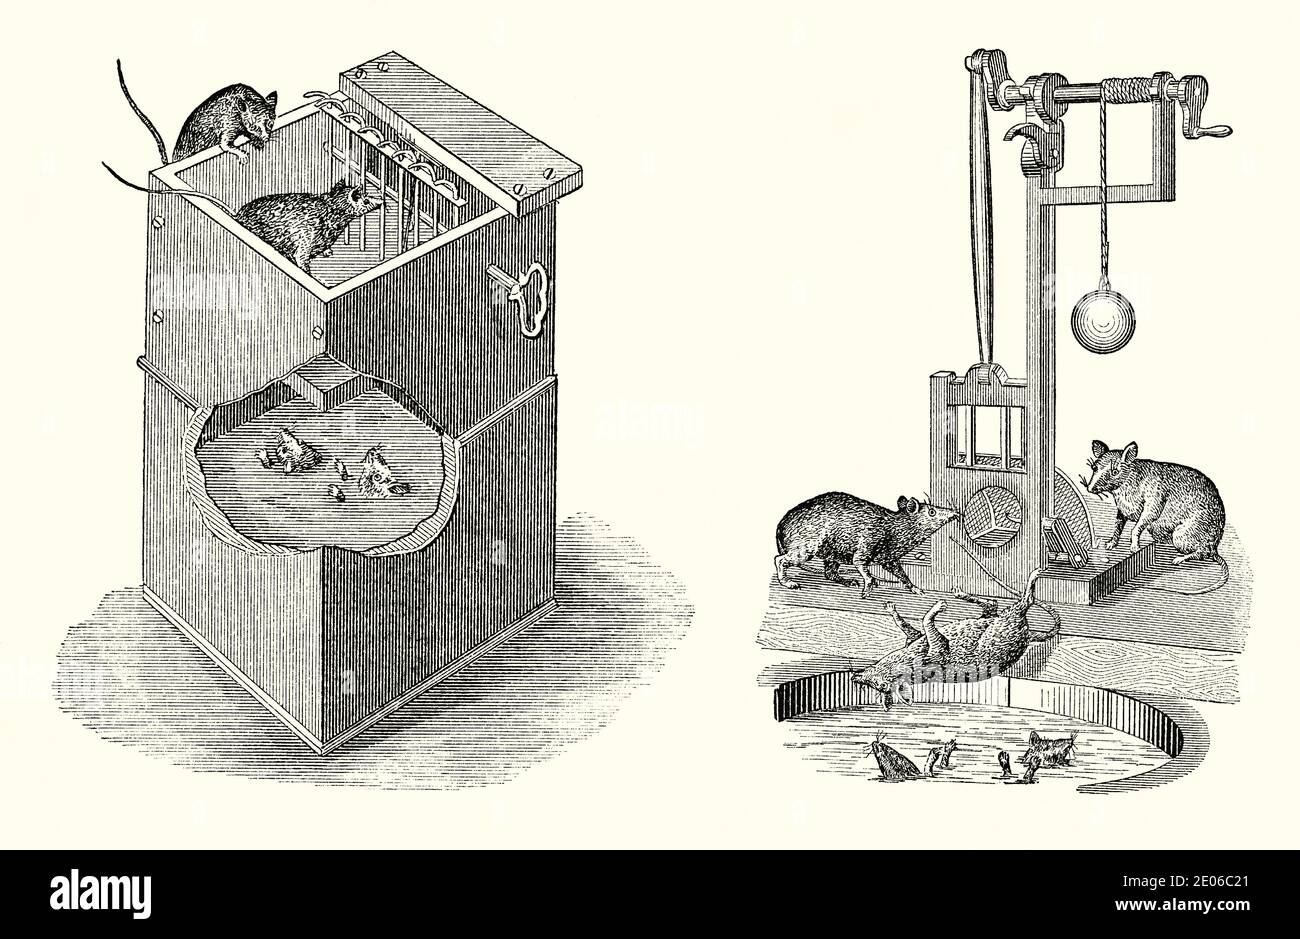 https://c8.alamy.com/comp/2E06C21/an-old-engraving-of-victorian-rat-traps-from-a-book-of-the-1880s-these-large-animal-traps-were-designed-for-rodent-infestations-left-is-a-box-with-bait-protected-by-a-guard-when-the-rat-pushes-its-nose-through-the-guard-a-pivot-is-triggered-rotating-the-floor-dropping-the-animal-into-the-tank-the-platform-returns-to-its-horizontal-position-the-trap-right-has-bait-on-a-hook-within-an-aperture-when-nudged-a-mechanism-brings-down-a-pronged-guillotine-to-impale-the-animal-the-counterweight-releases-the-blade-back-up-to-its-start-position-the-dead-rat-falls-into-the-collection-tank-2E06C21.jpg